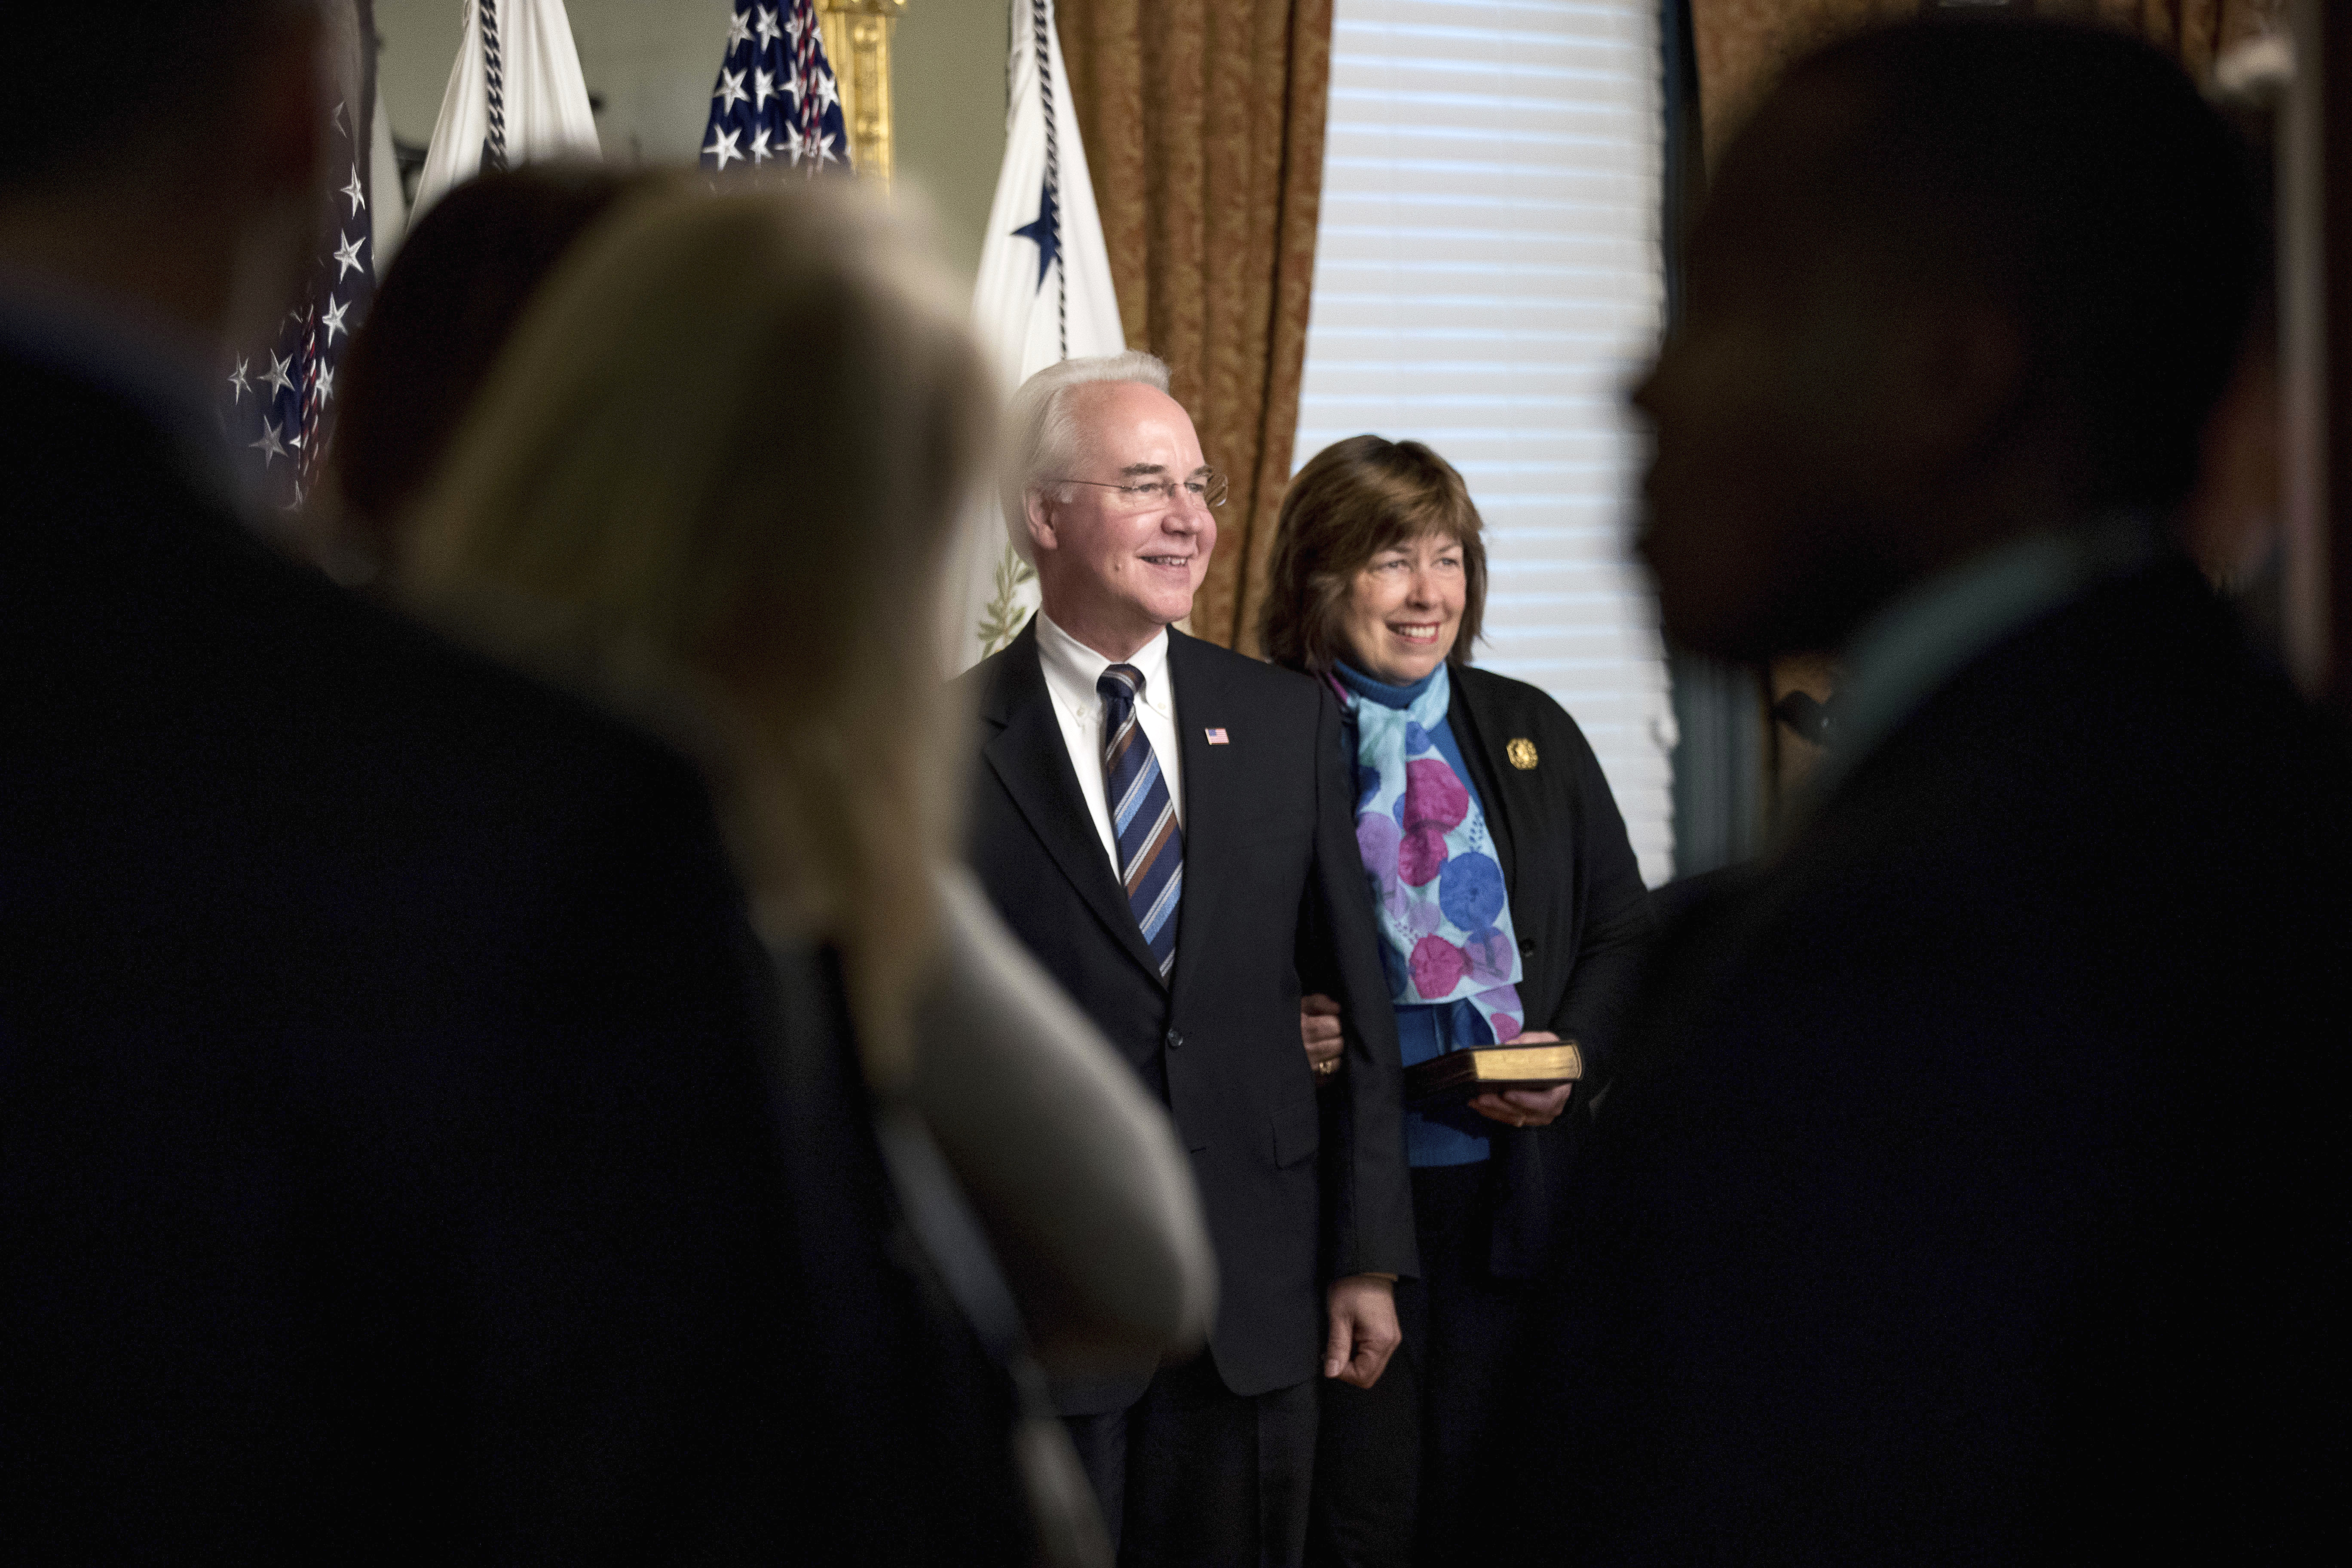 Sonny Perdue, Tom Price adjust to life in the D.C. bubble